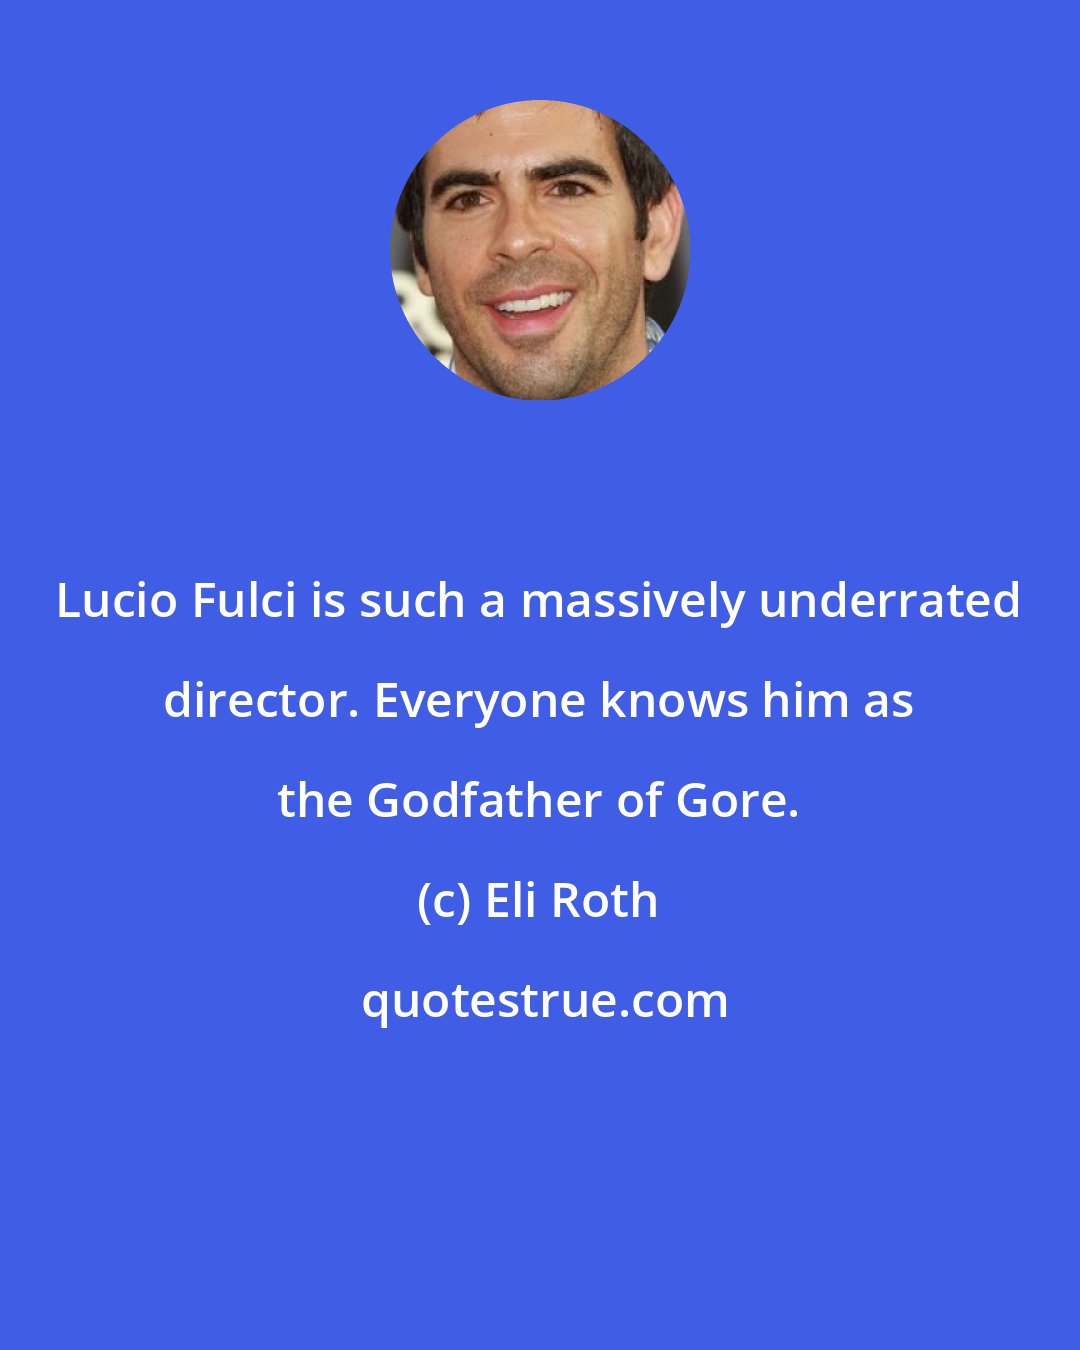 Eli Roth: Lucio Fulci is such a massively underrated director. Everyone knows him as the Godfather of Gore.